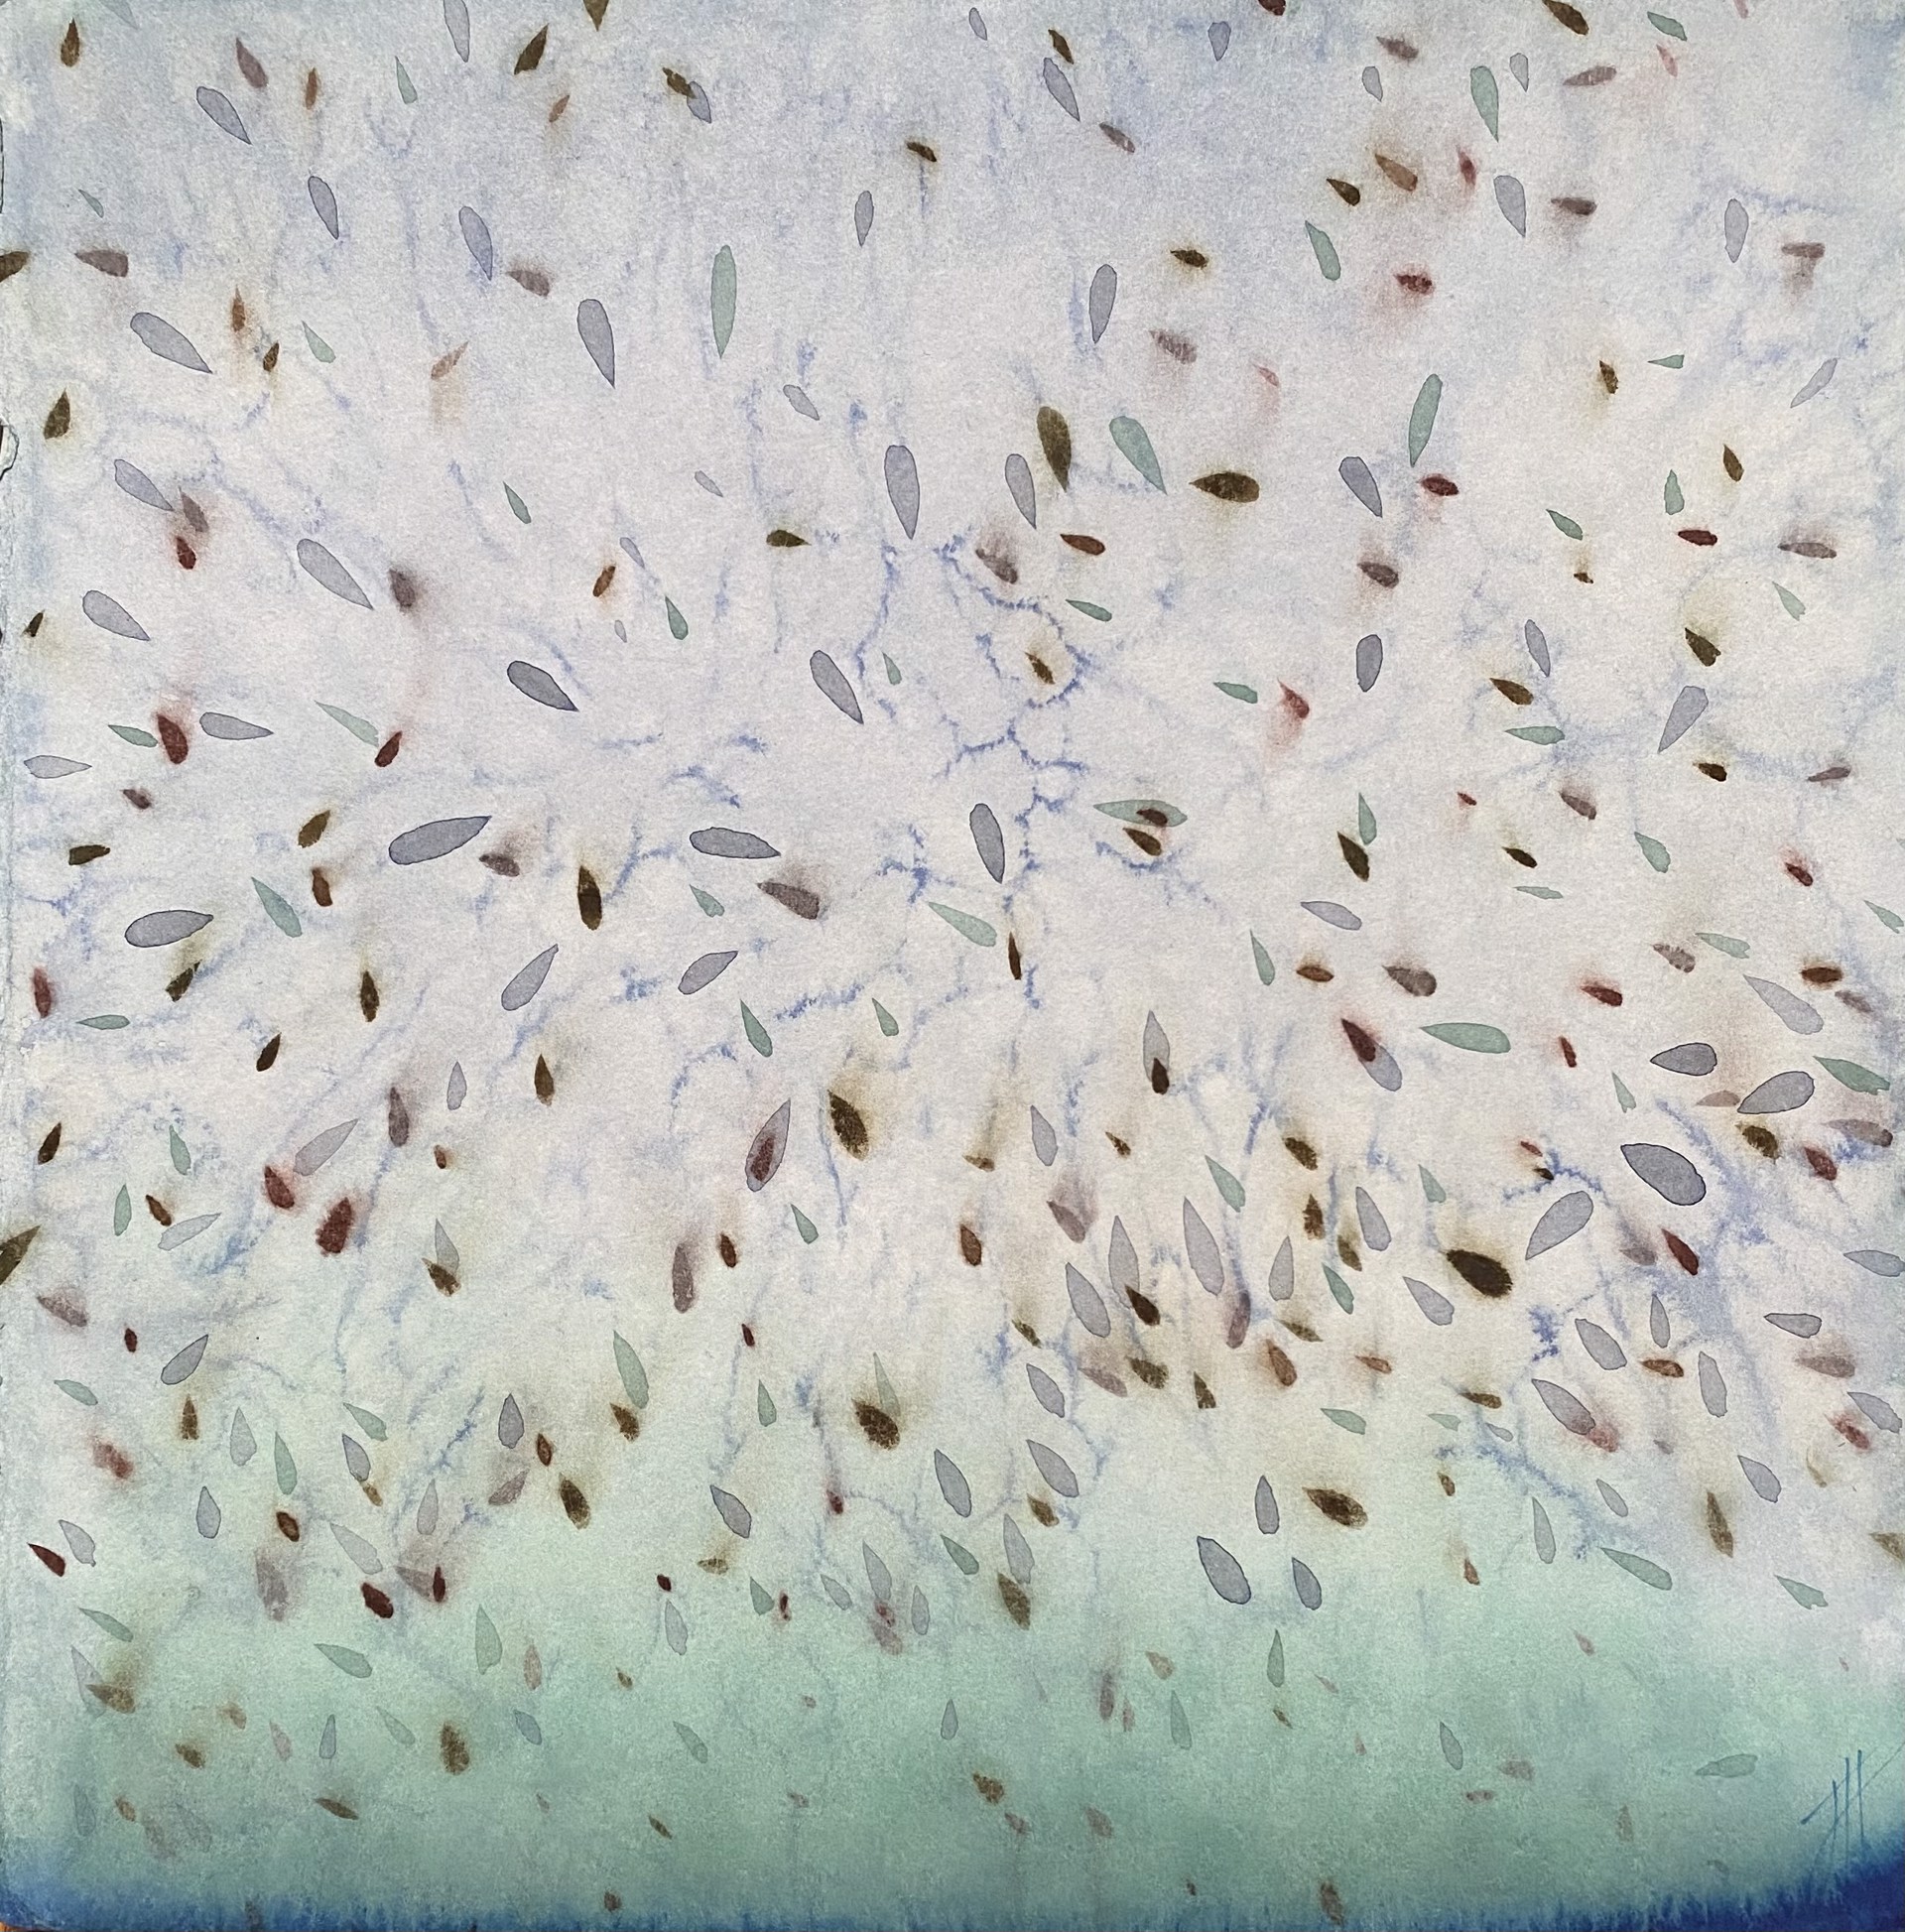 SOLD, Untitled (Blue Seeds) by Jan Heaton